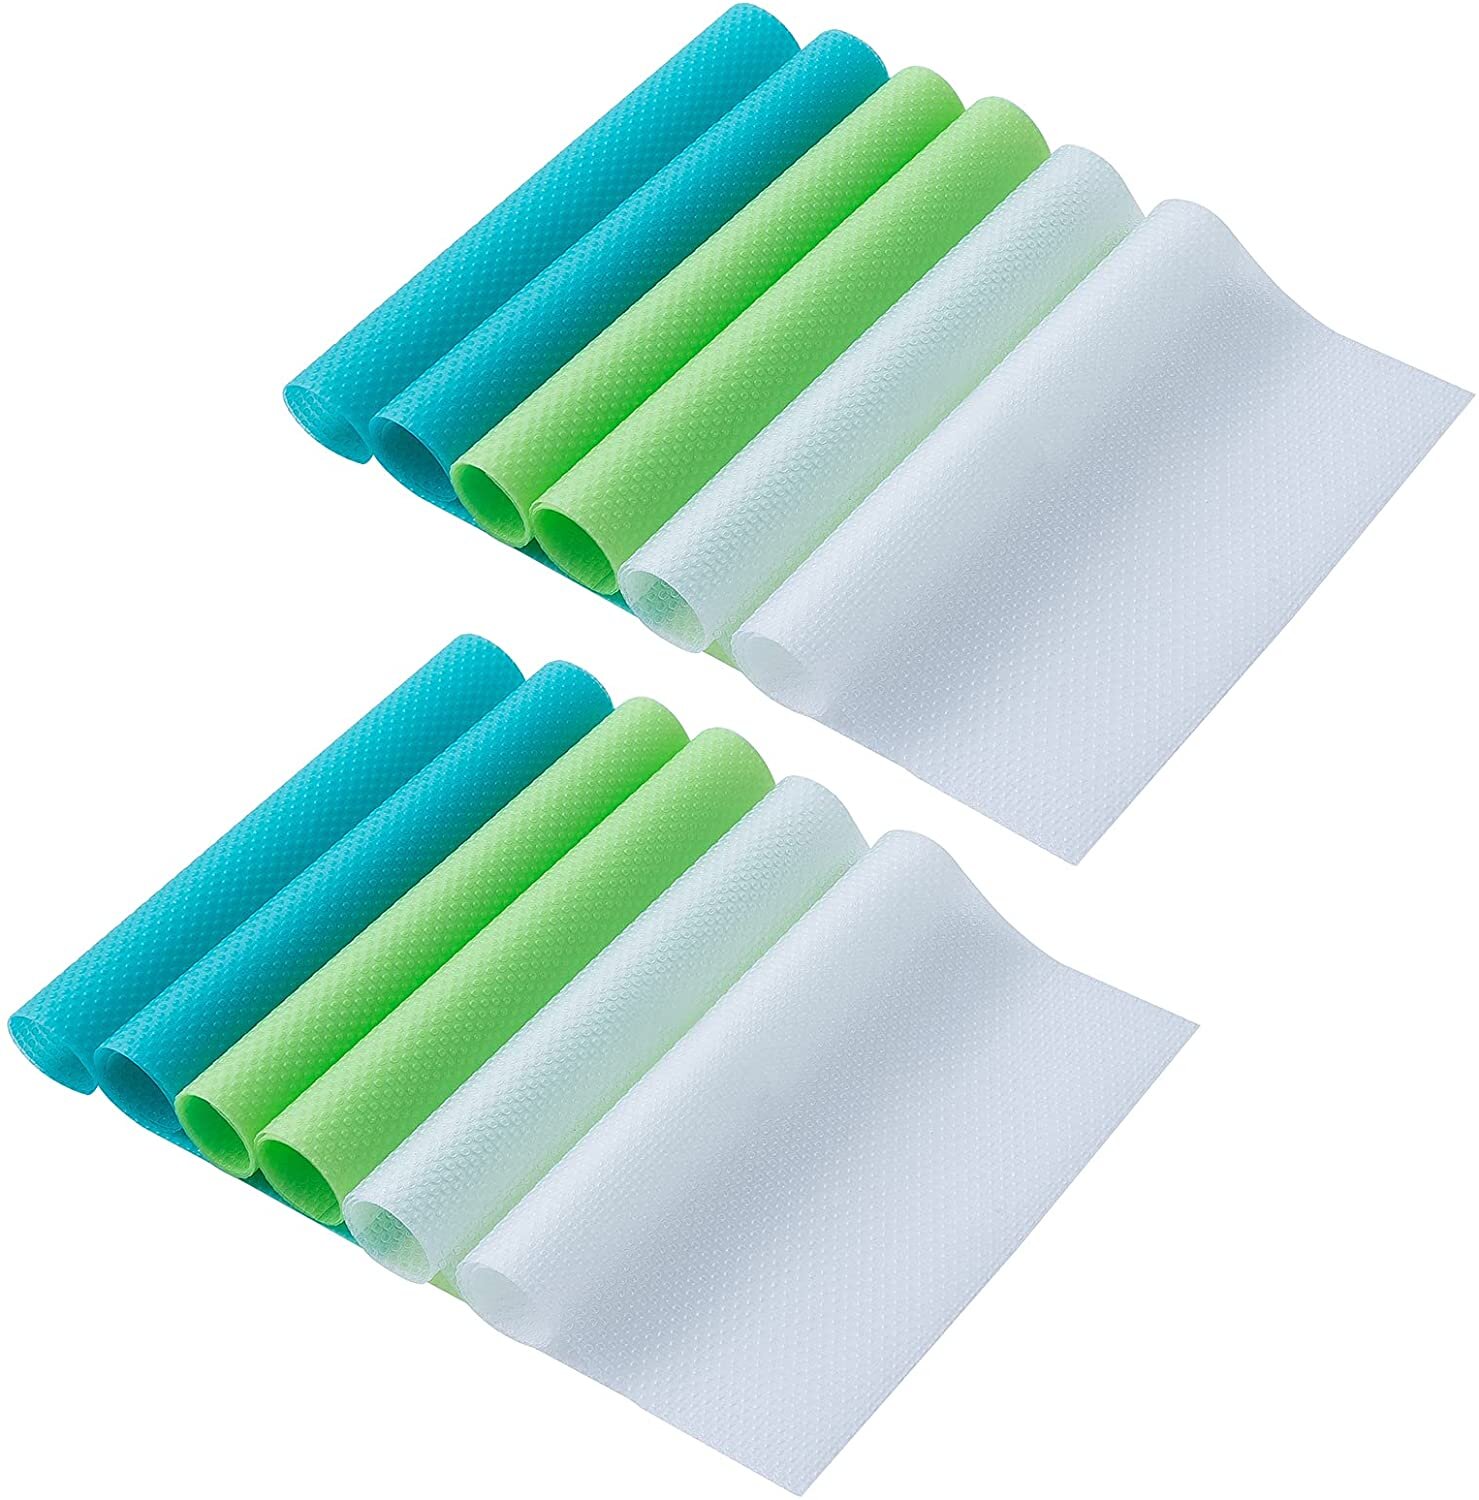 Colorful Cuttable Kitchen Cabinet Shelves Mat Washable Refrigerator Liners,Fridge Pad Easy to Clean Shelf Liner Wanapure 12 Pack Refrigerator Mats Non Adhesive Drawer Table Placemats